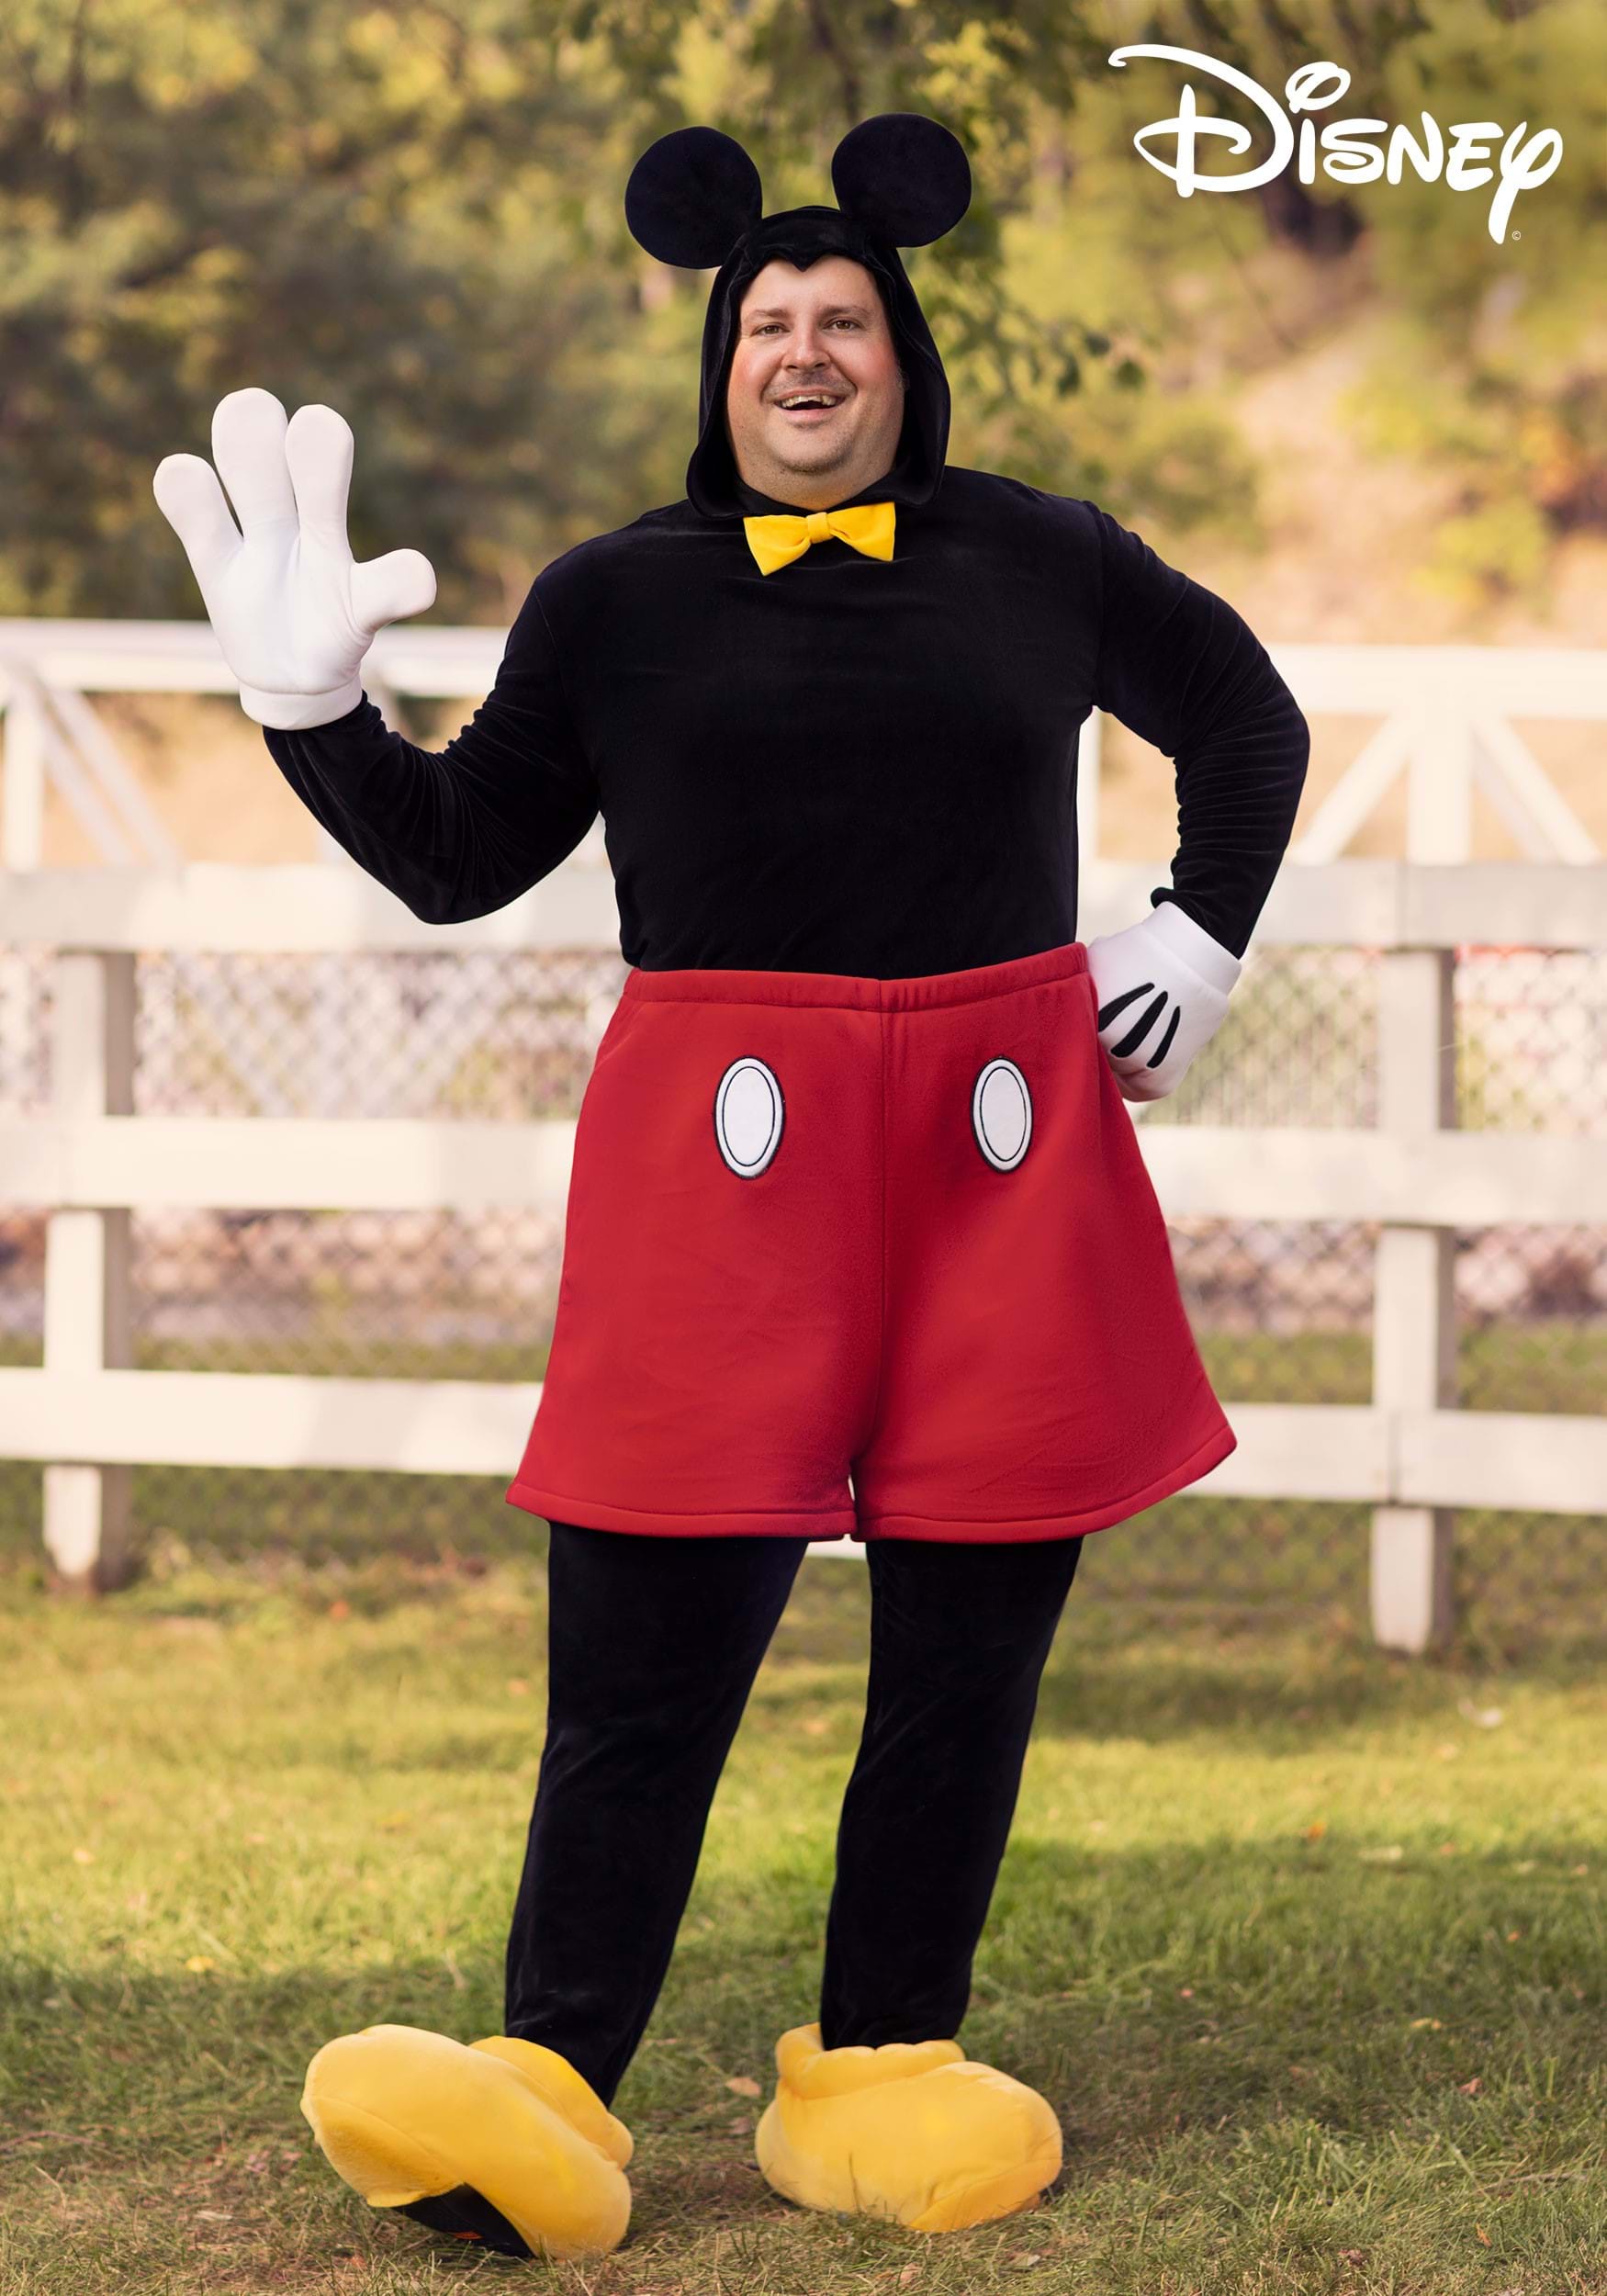 https://images.halloweencostumes.ca/products/74863/1-1/plus-size-deluxe-mickey-mouse-costume.jpg